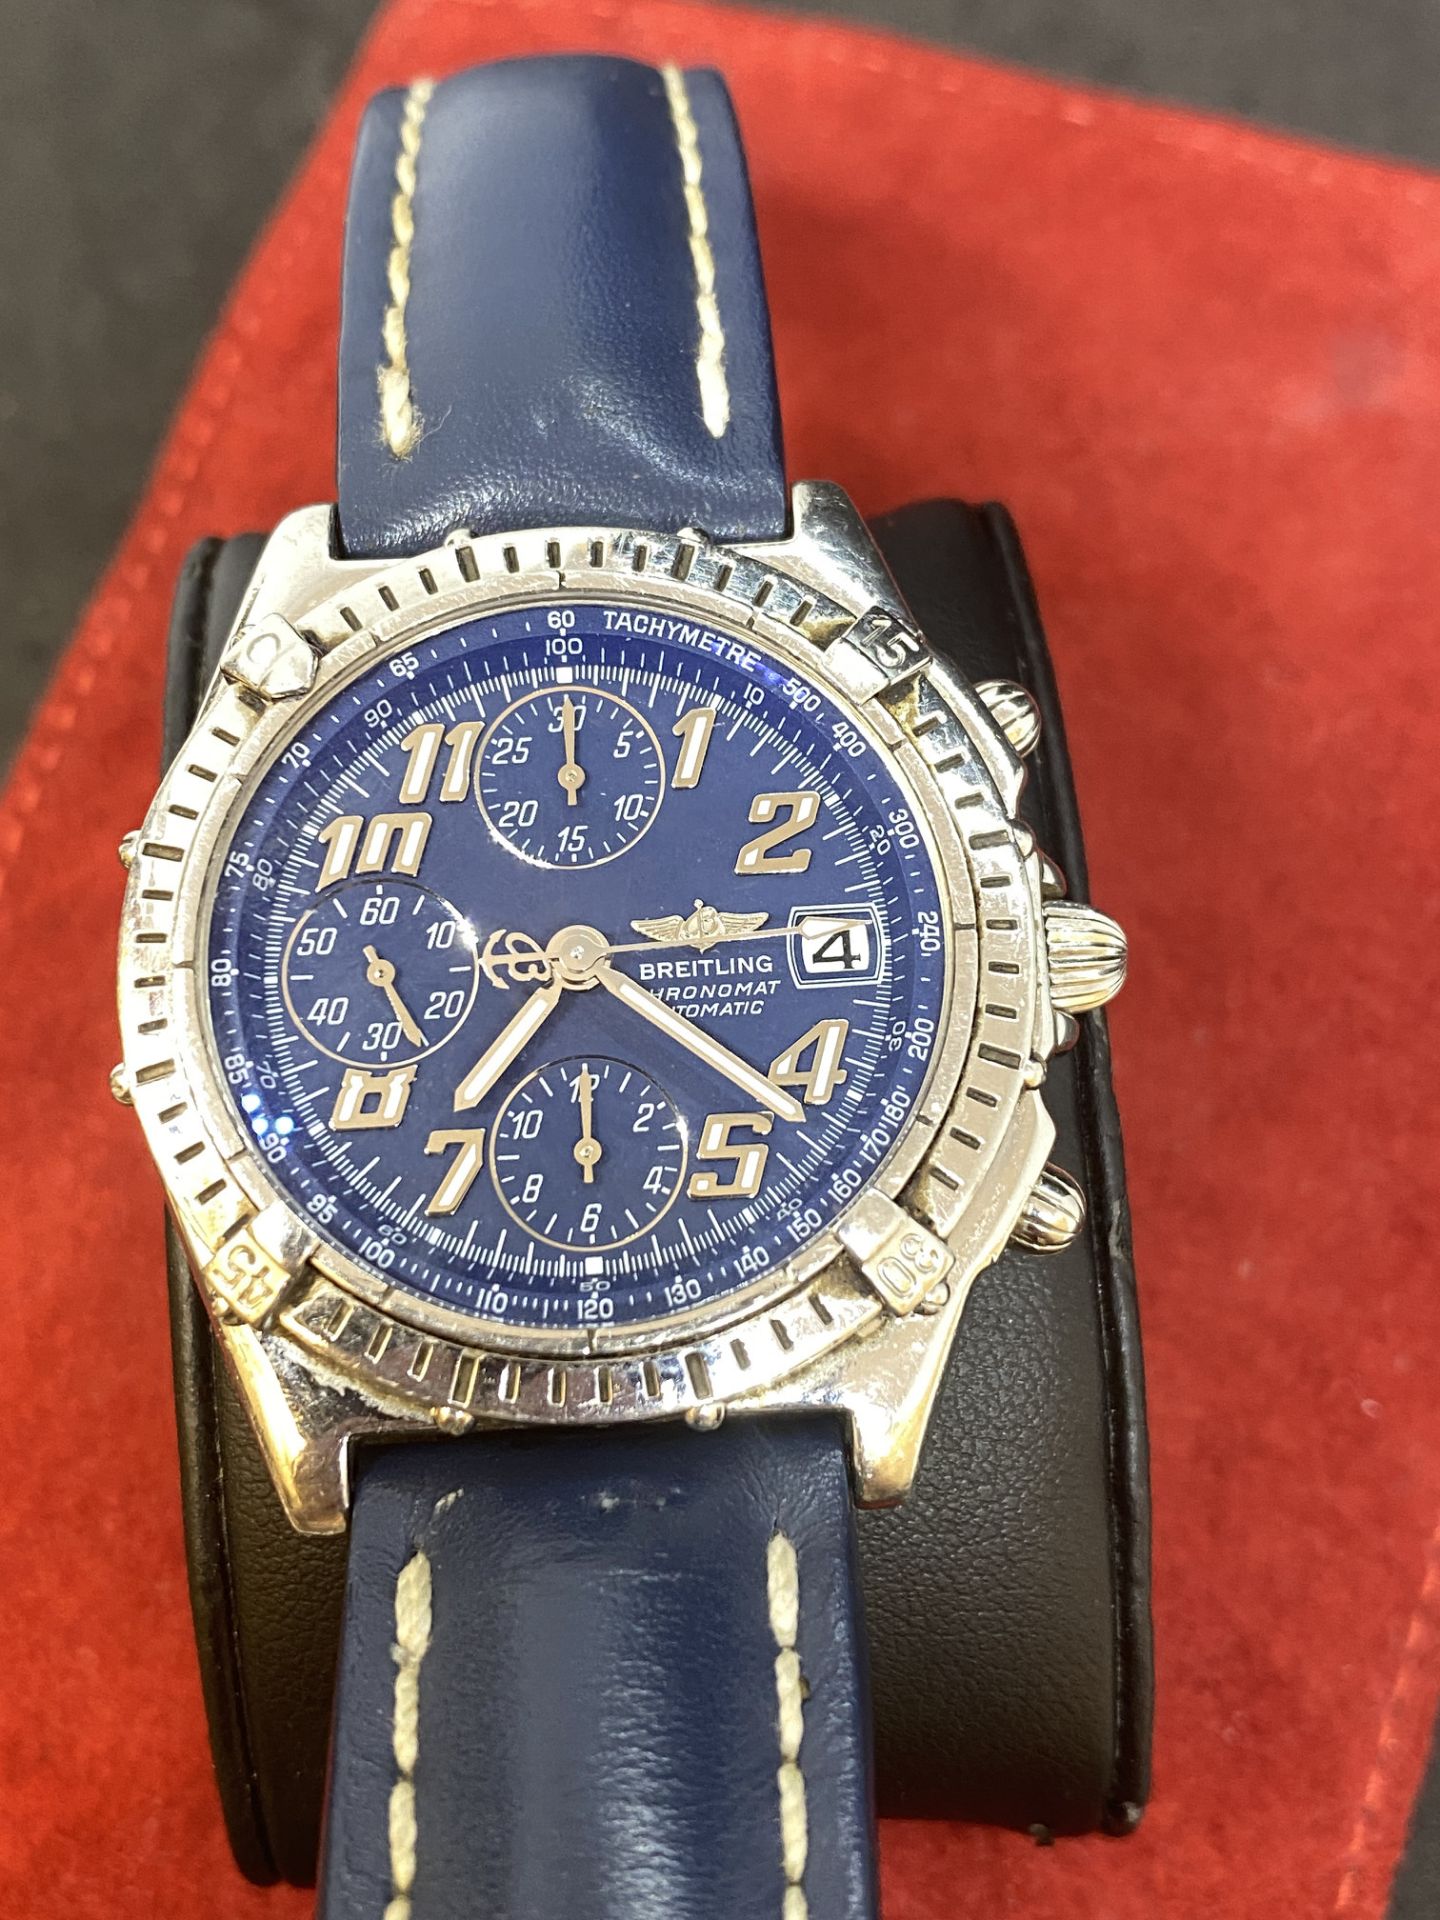 BREITLING CHRONO WATCH - Image 12 of 12